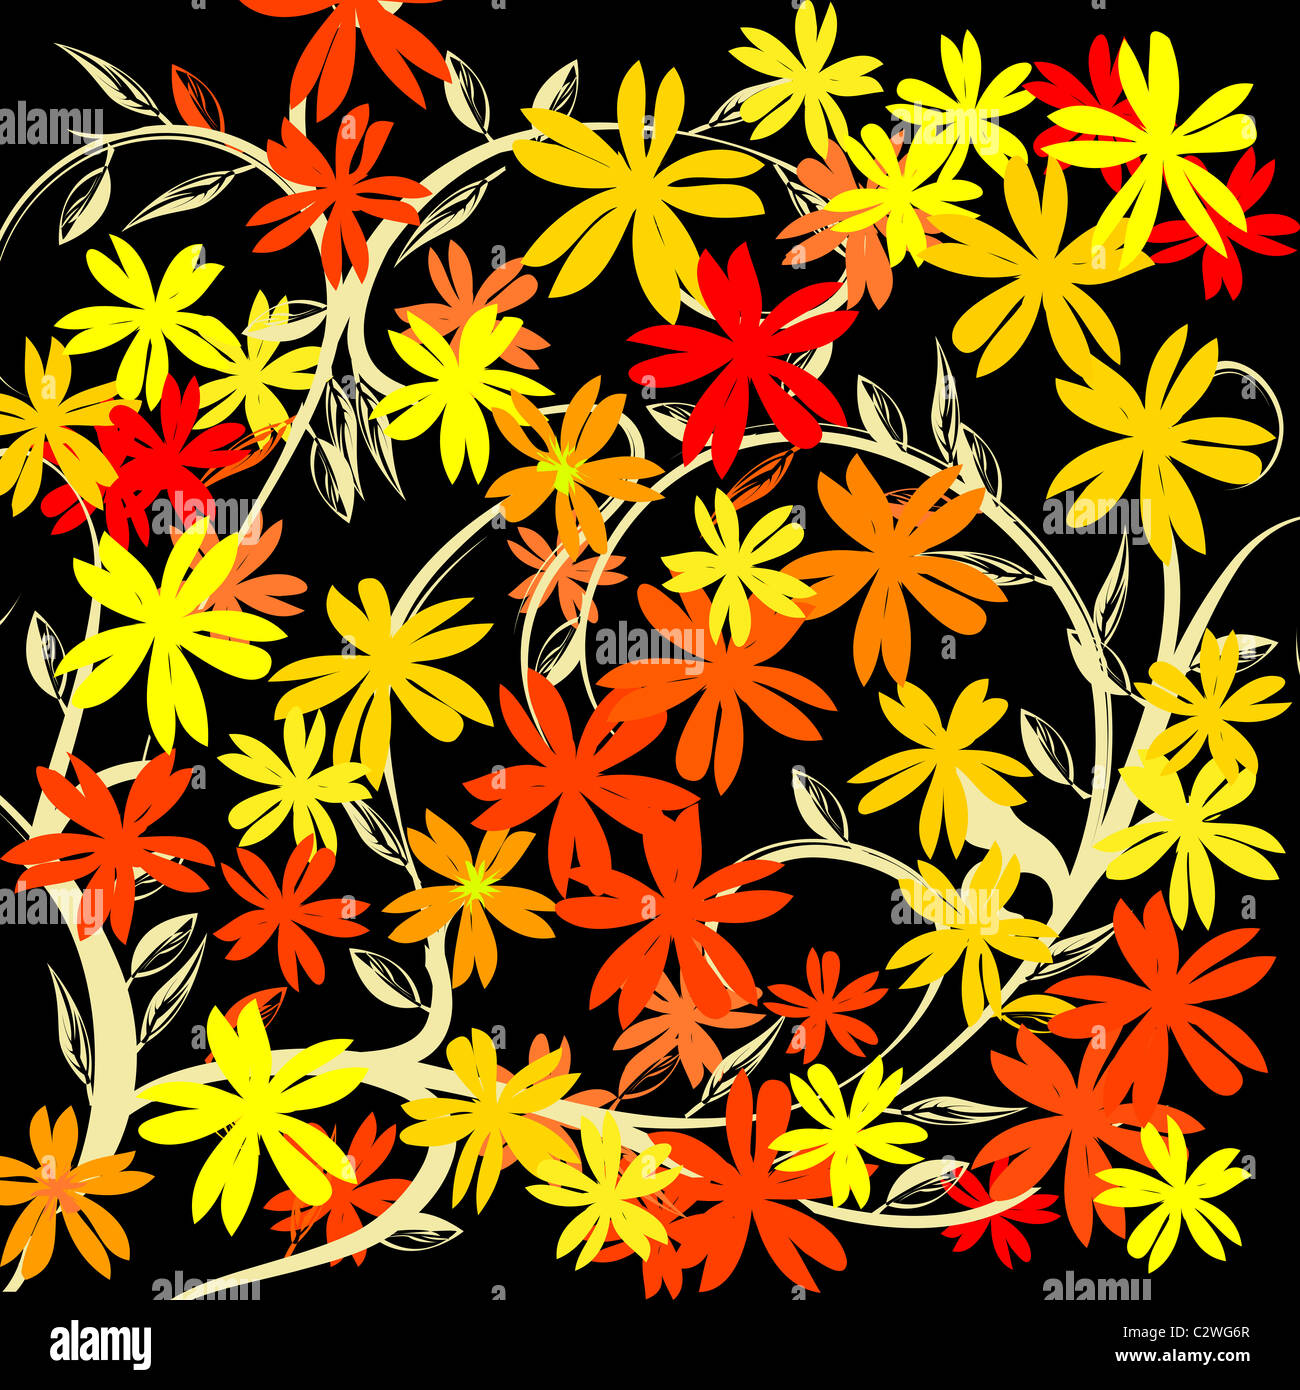 Floral background Stock Photo